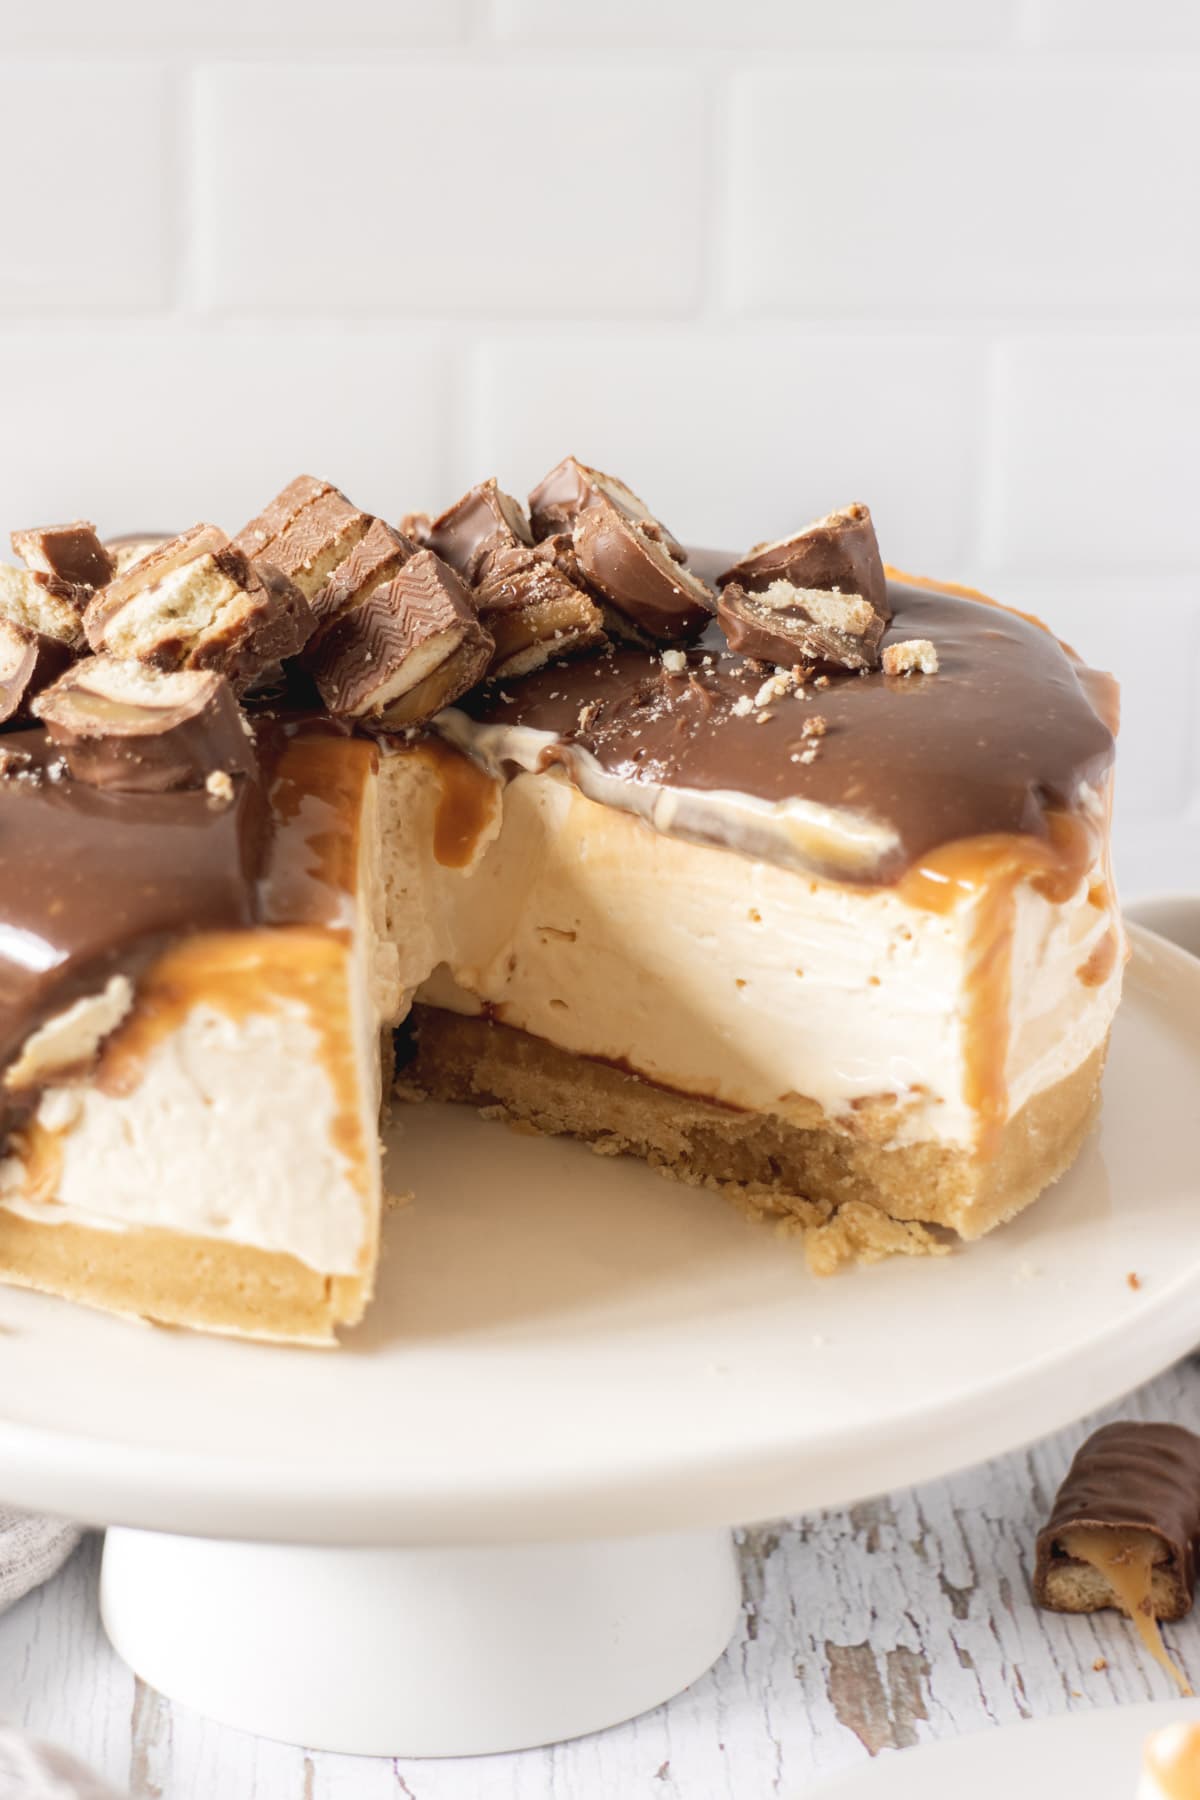 Twix cheesecake with a slice cut out of it